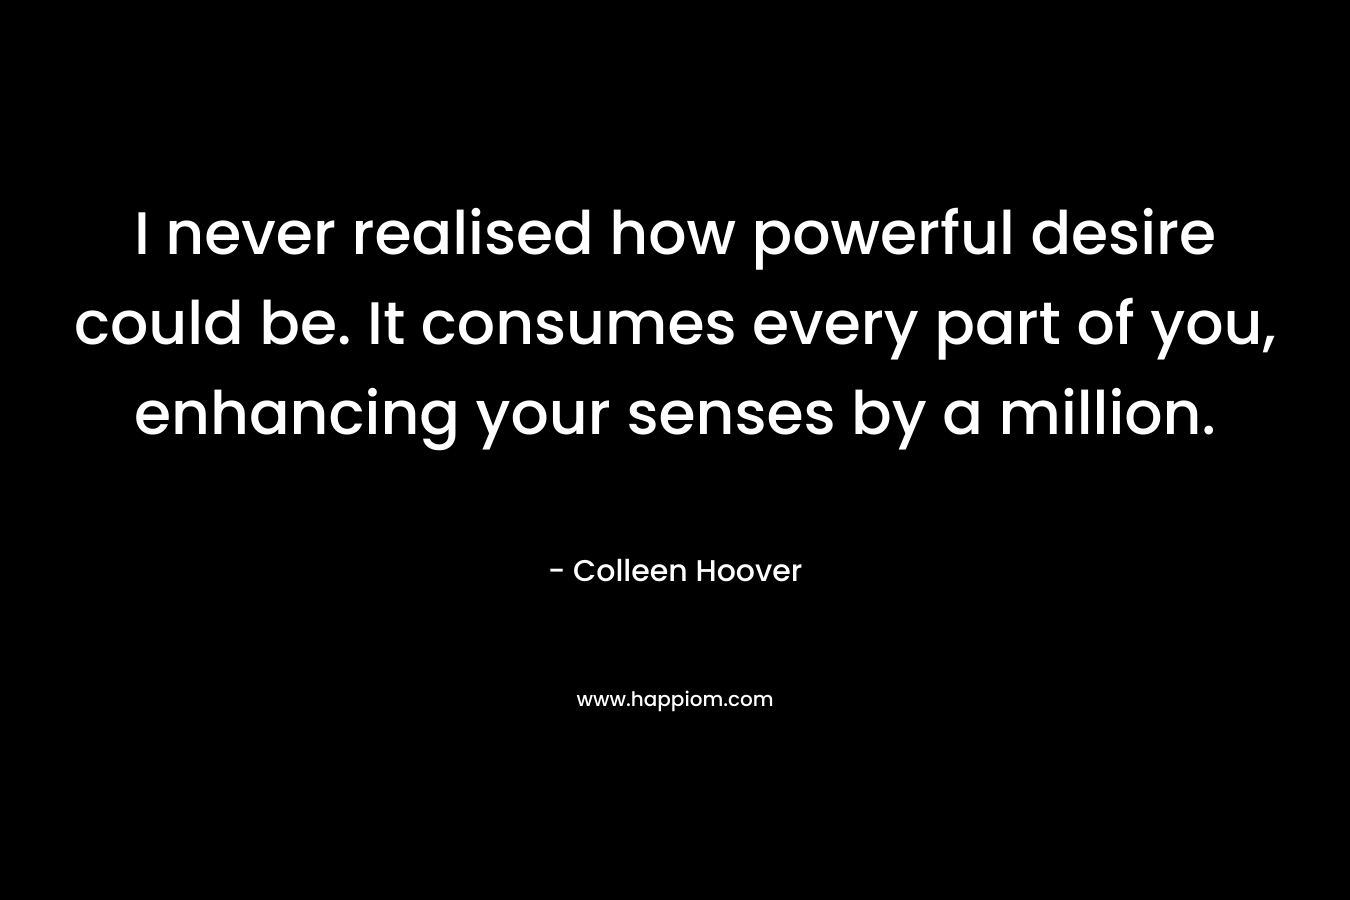 I never realised how powerful desire could be. It consumes every part of you, enhancing your senses by a million. – Colleen Hoover